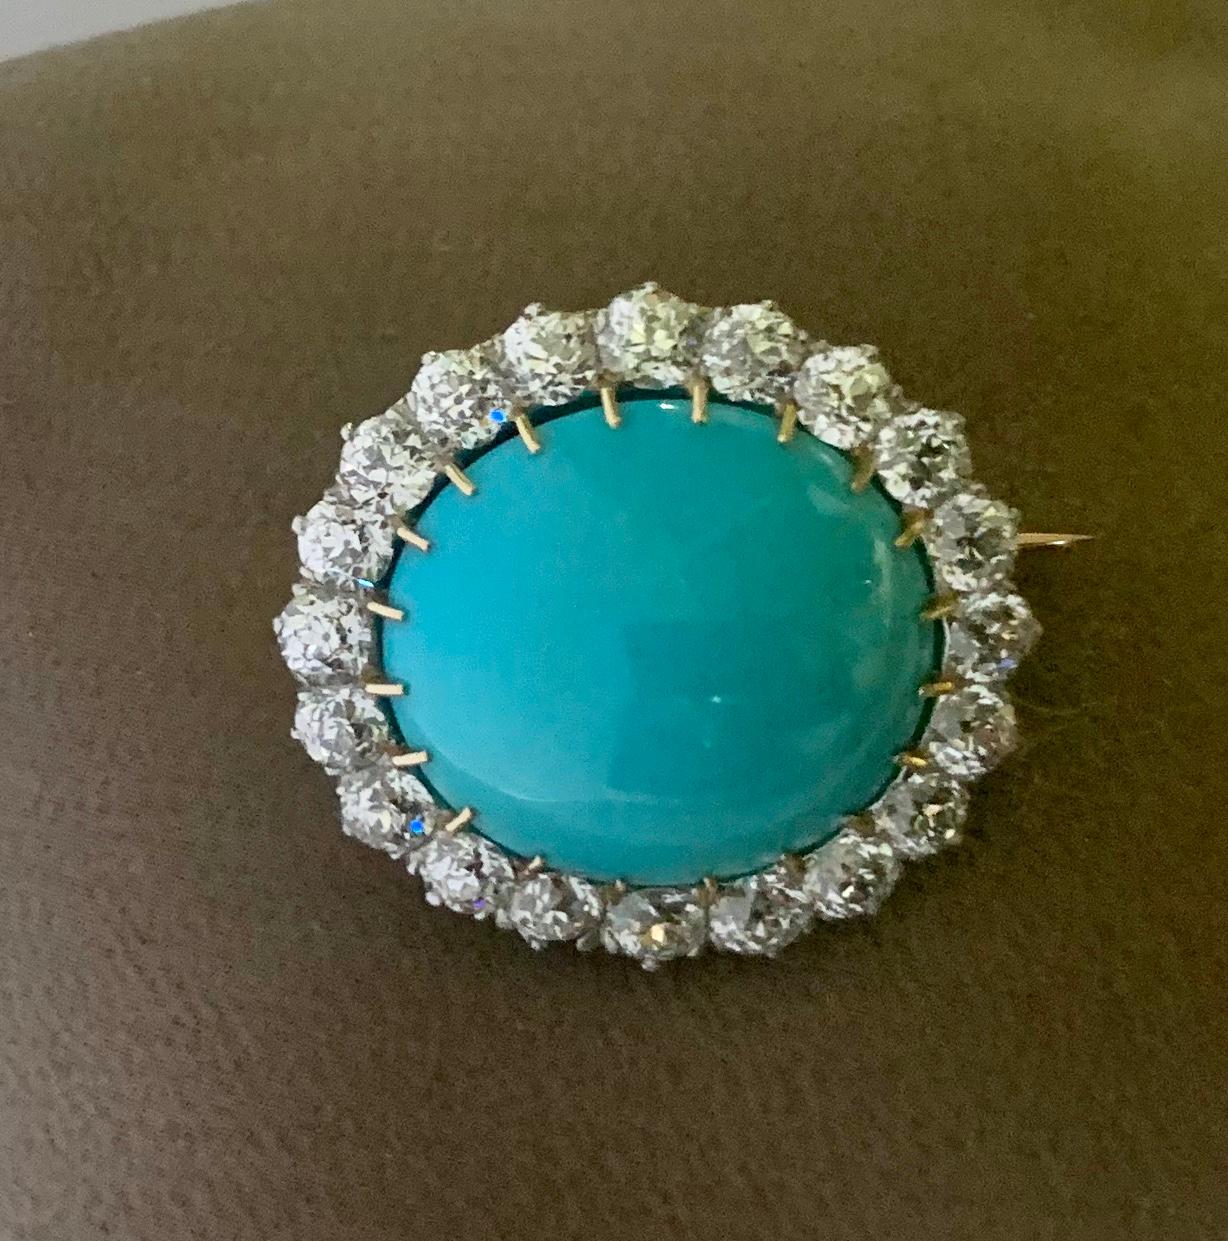 A real eye catcher: This classic brooch features a gorgeous Persian Turquoise cabochon of the most perfect blue color. The turquoise is surrounded by 20 old mine cut Diamonds weighing approximately 2.50 ct. In 18 K yellow and white Gold.
Masterfully